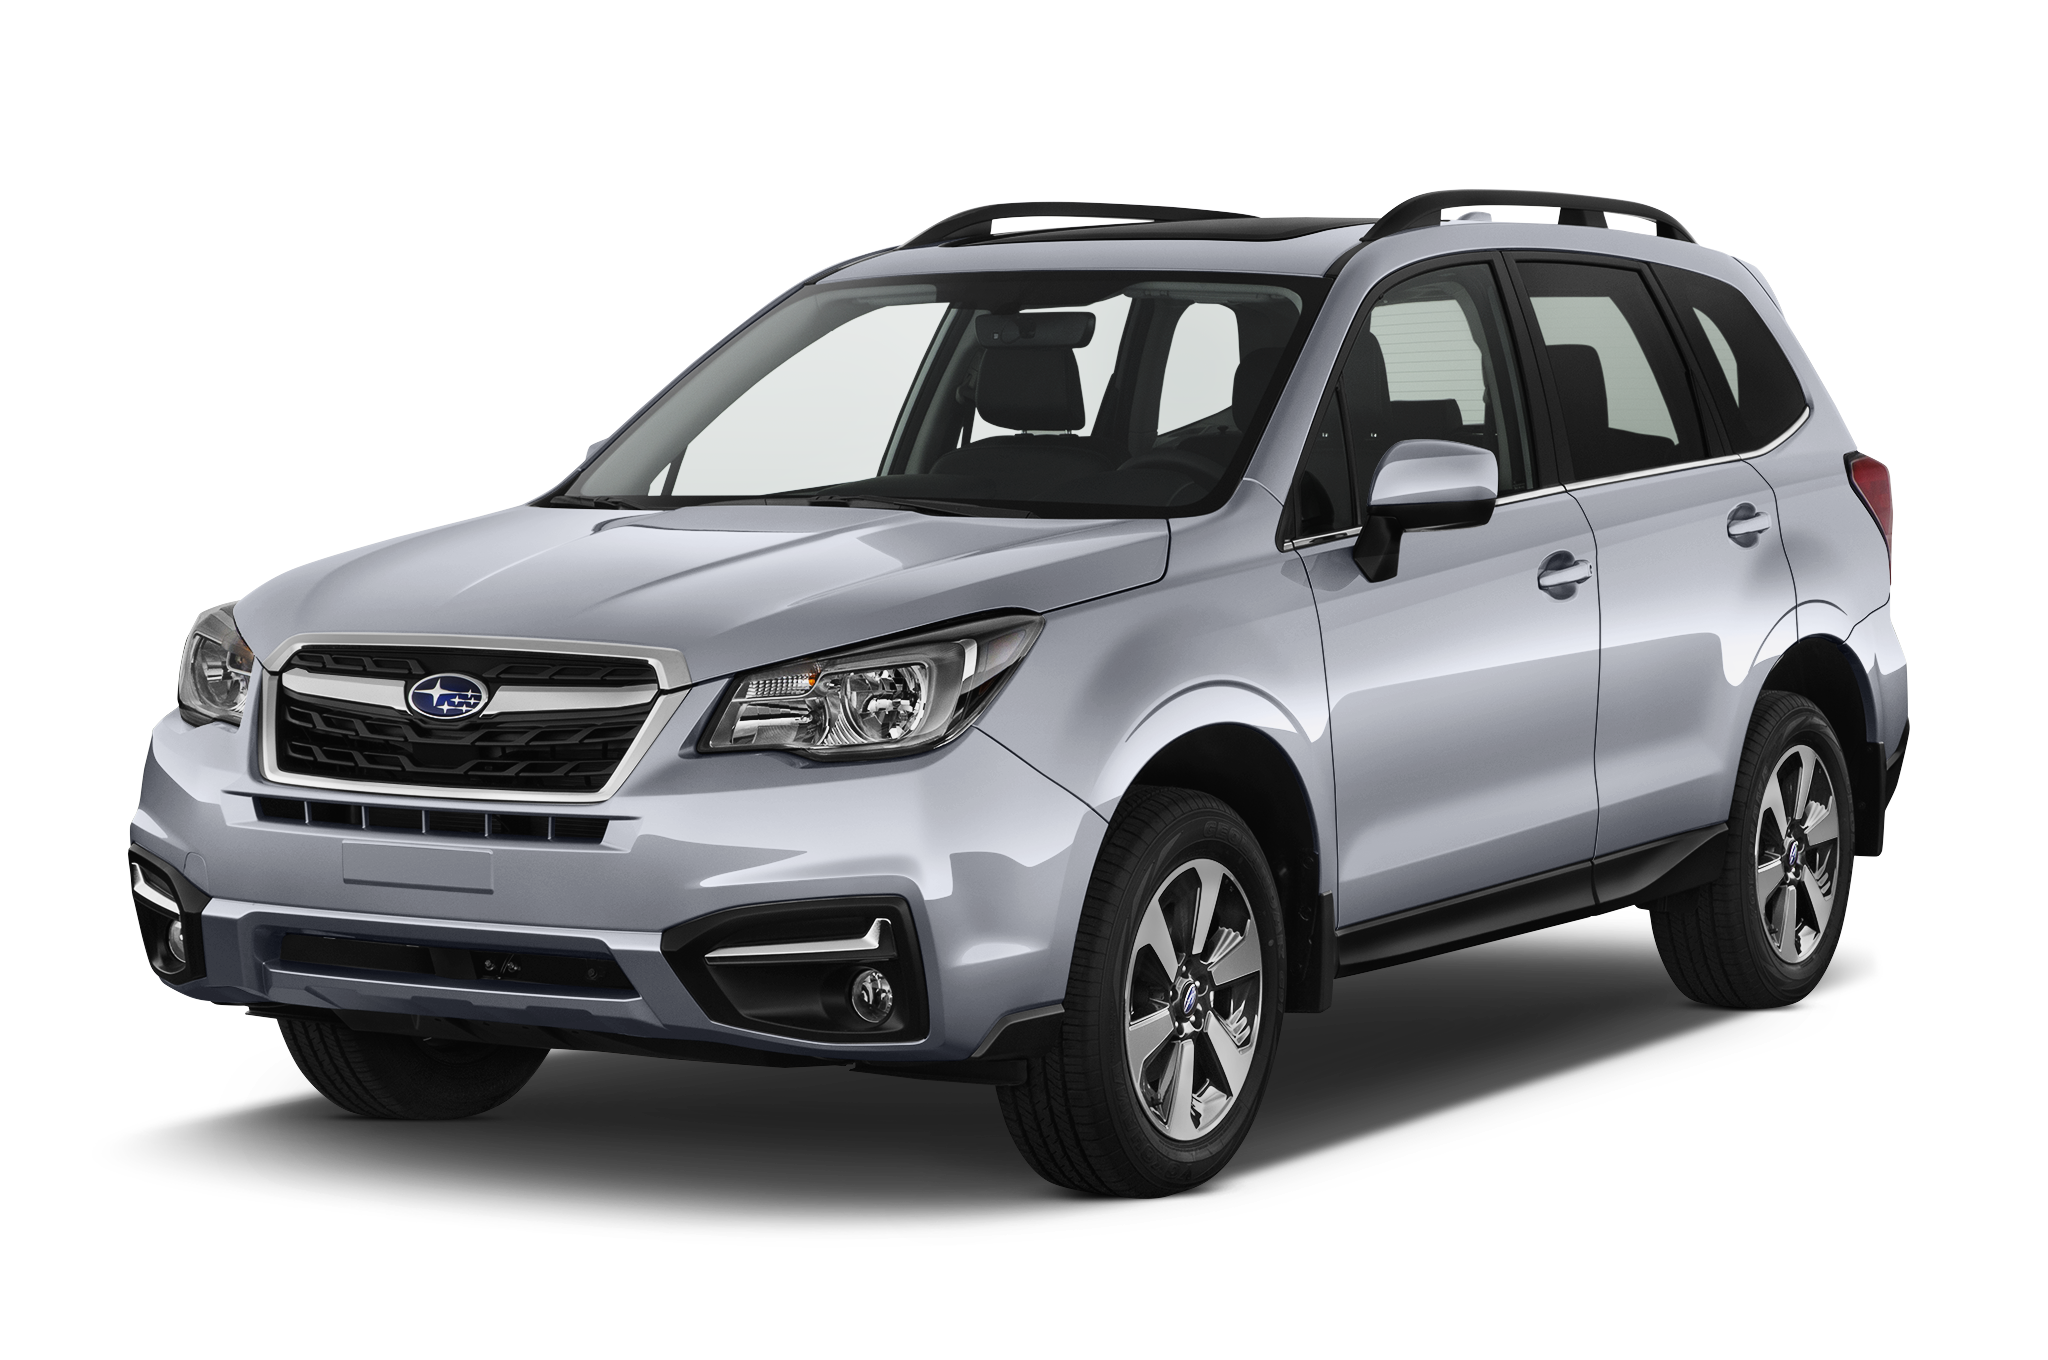 2017 Subaru Forester oem parts and accessories on sale